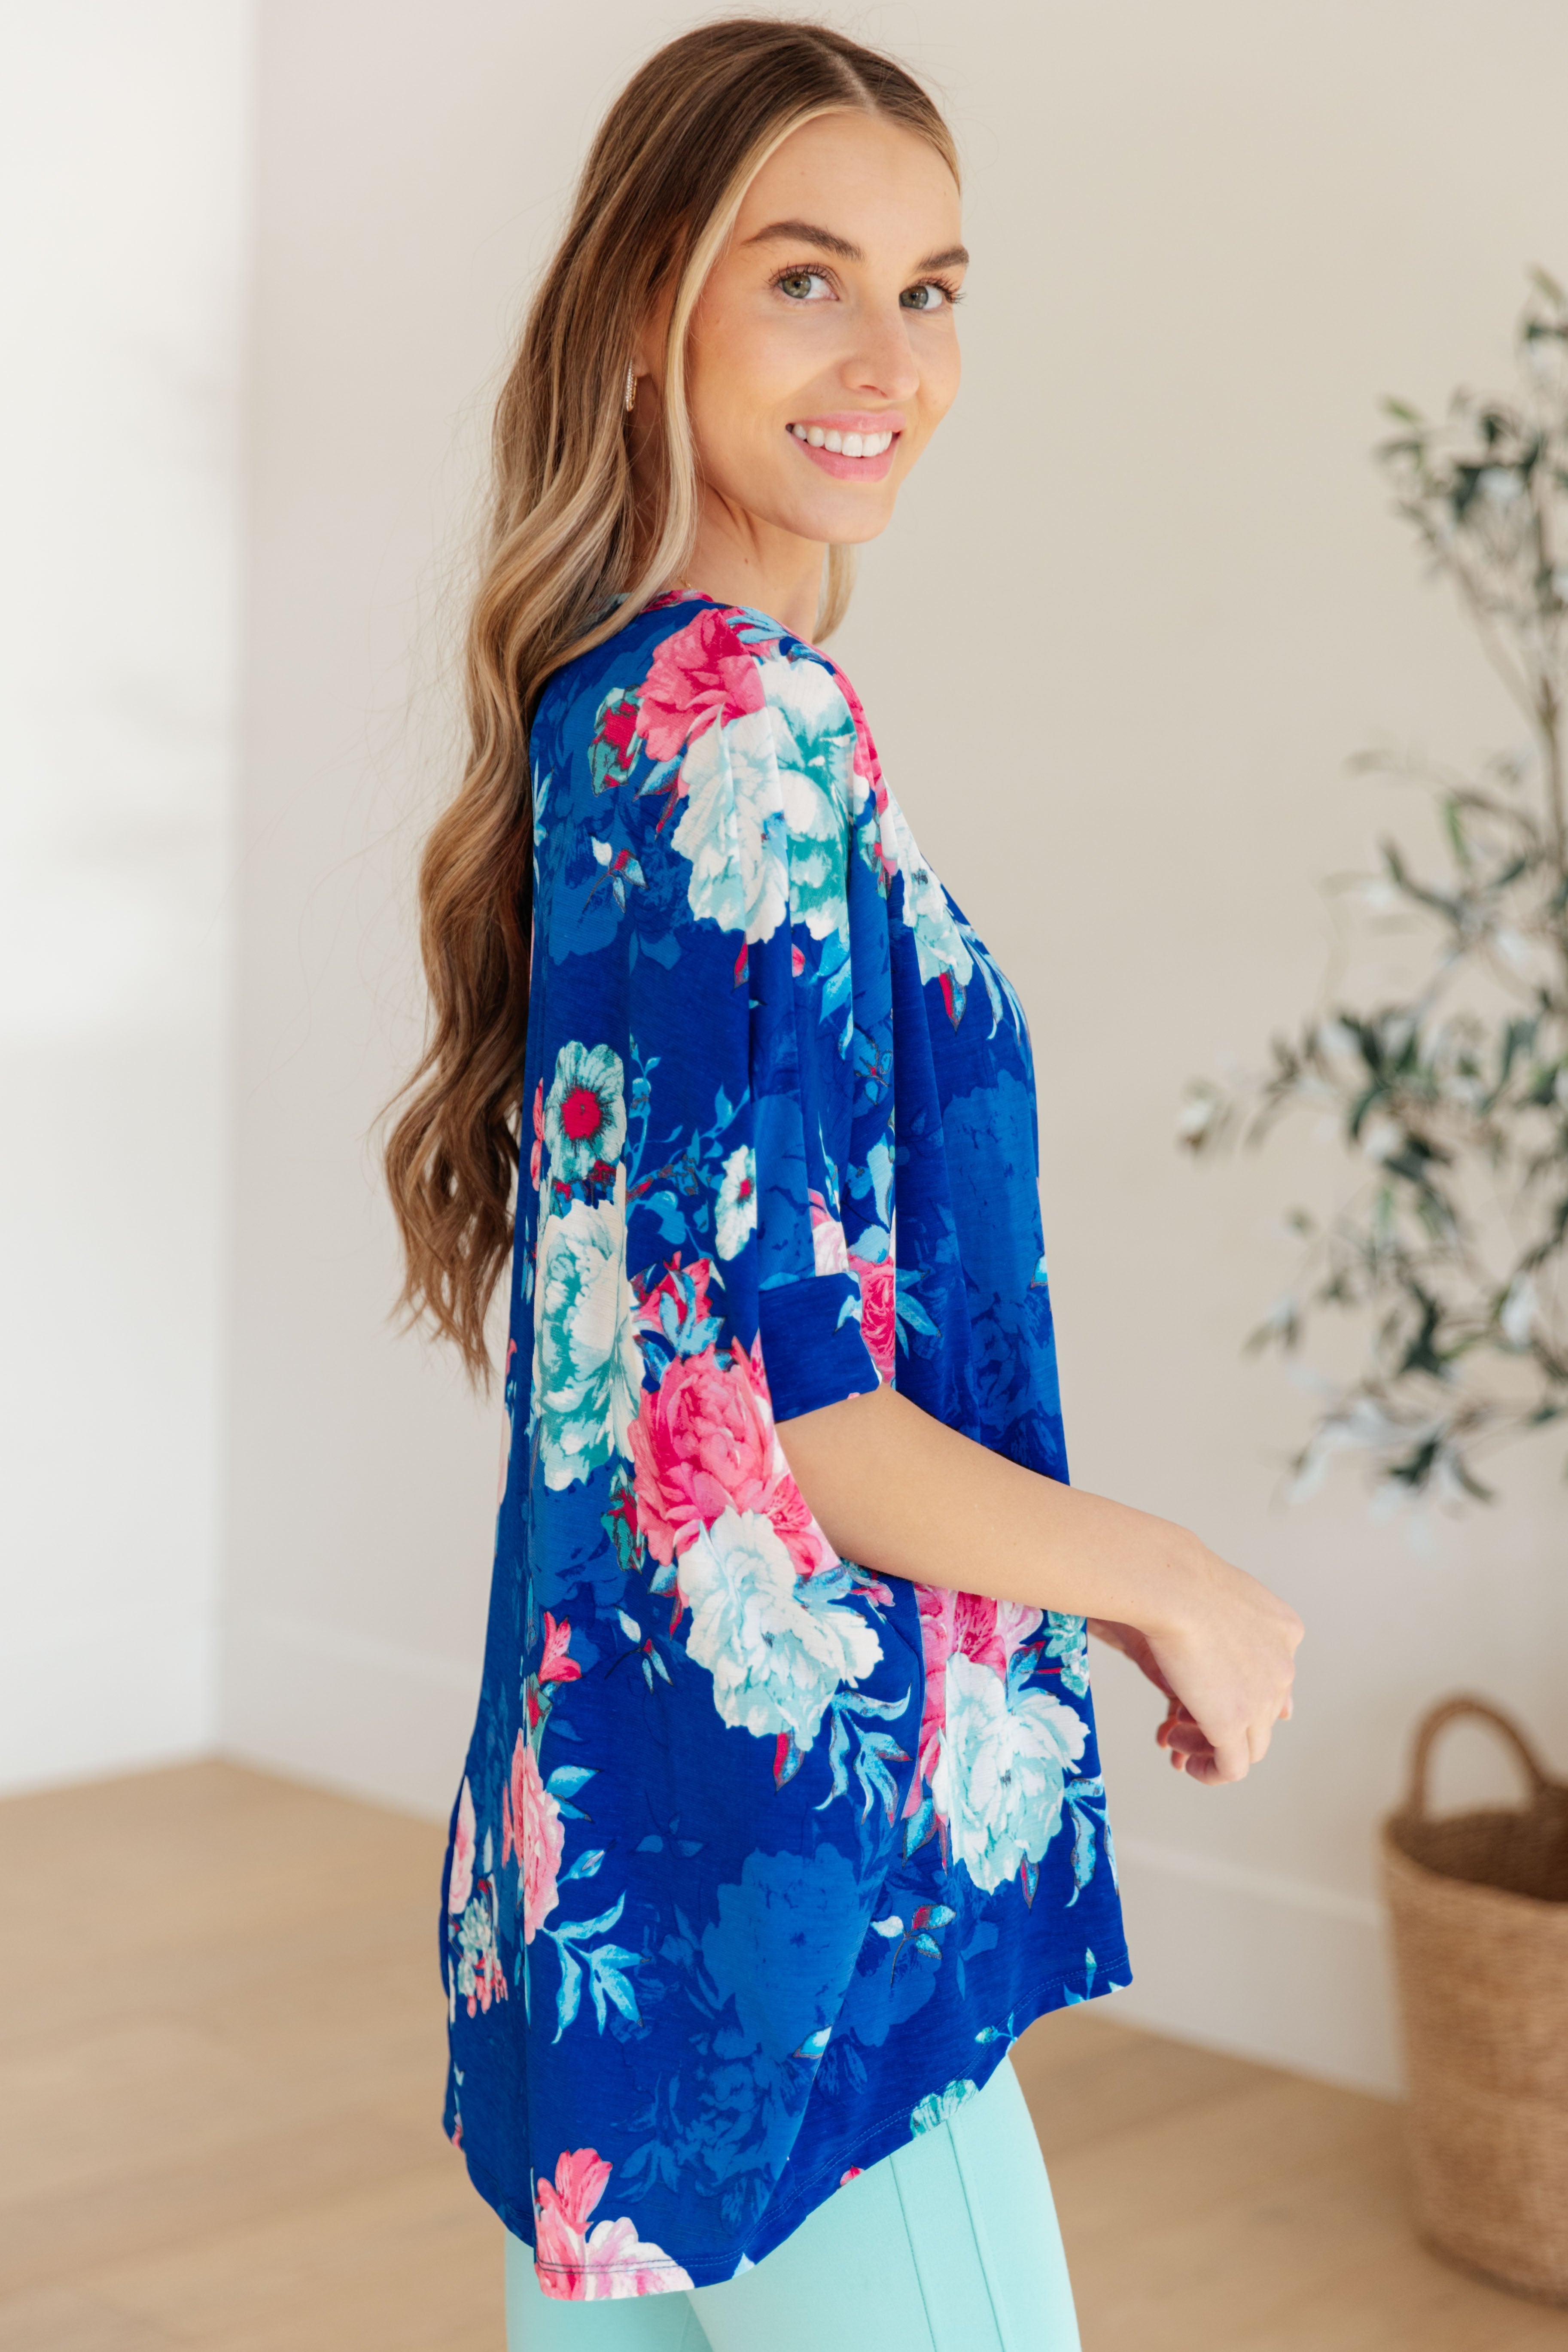 Dear Scarlett Essential Blouse in Royal and Pink Floral Final Sale Monday Markdown 06-10